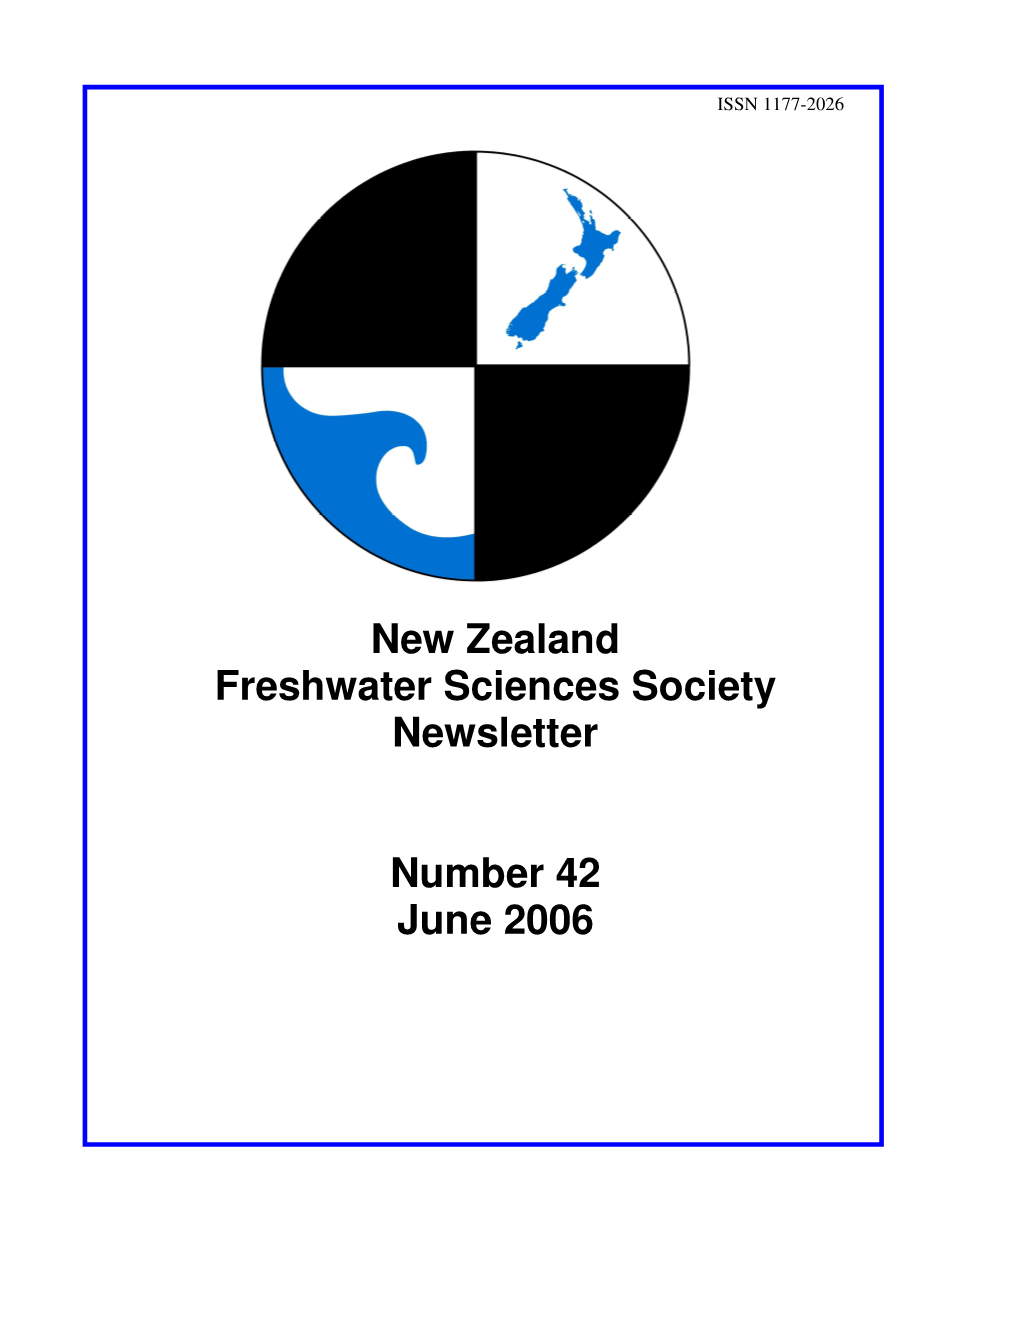 New Zealand Freshwater Sciences Society Newsletter Number 42 June